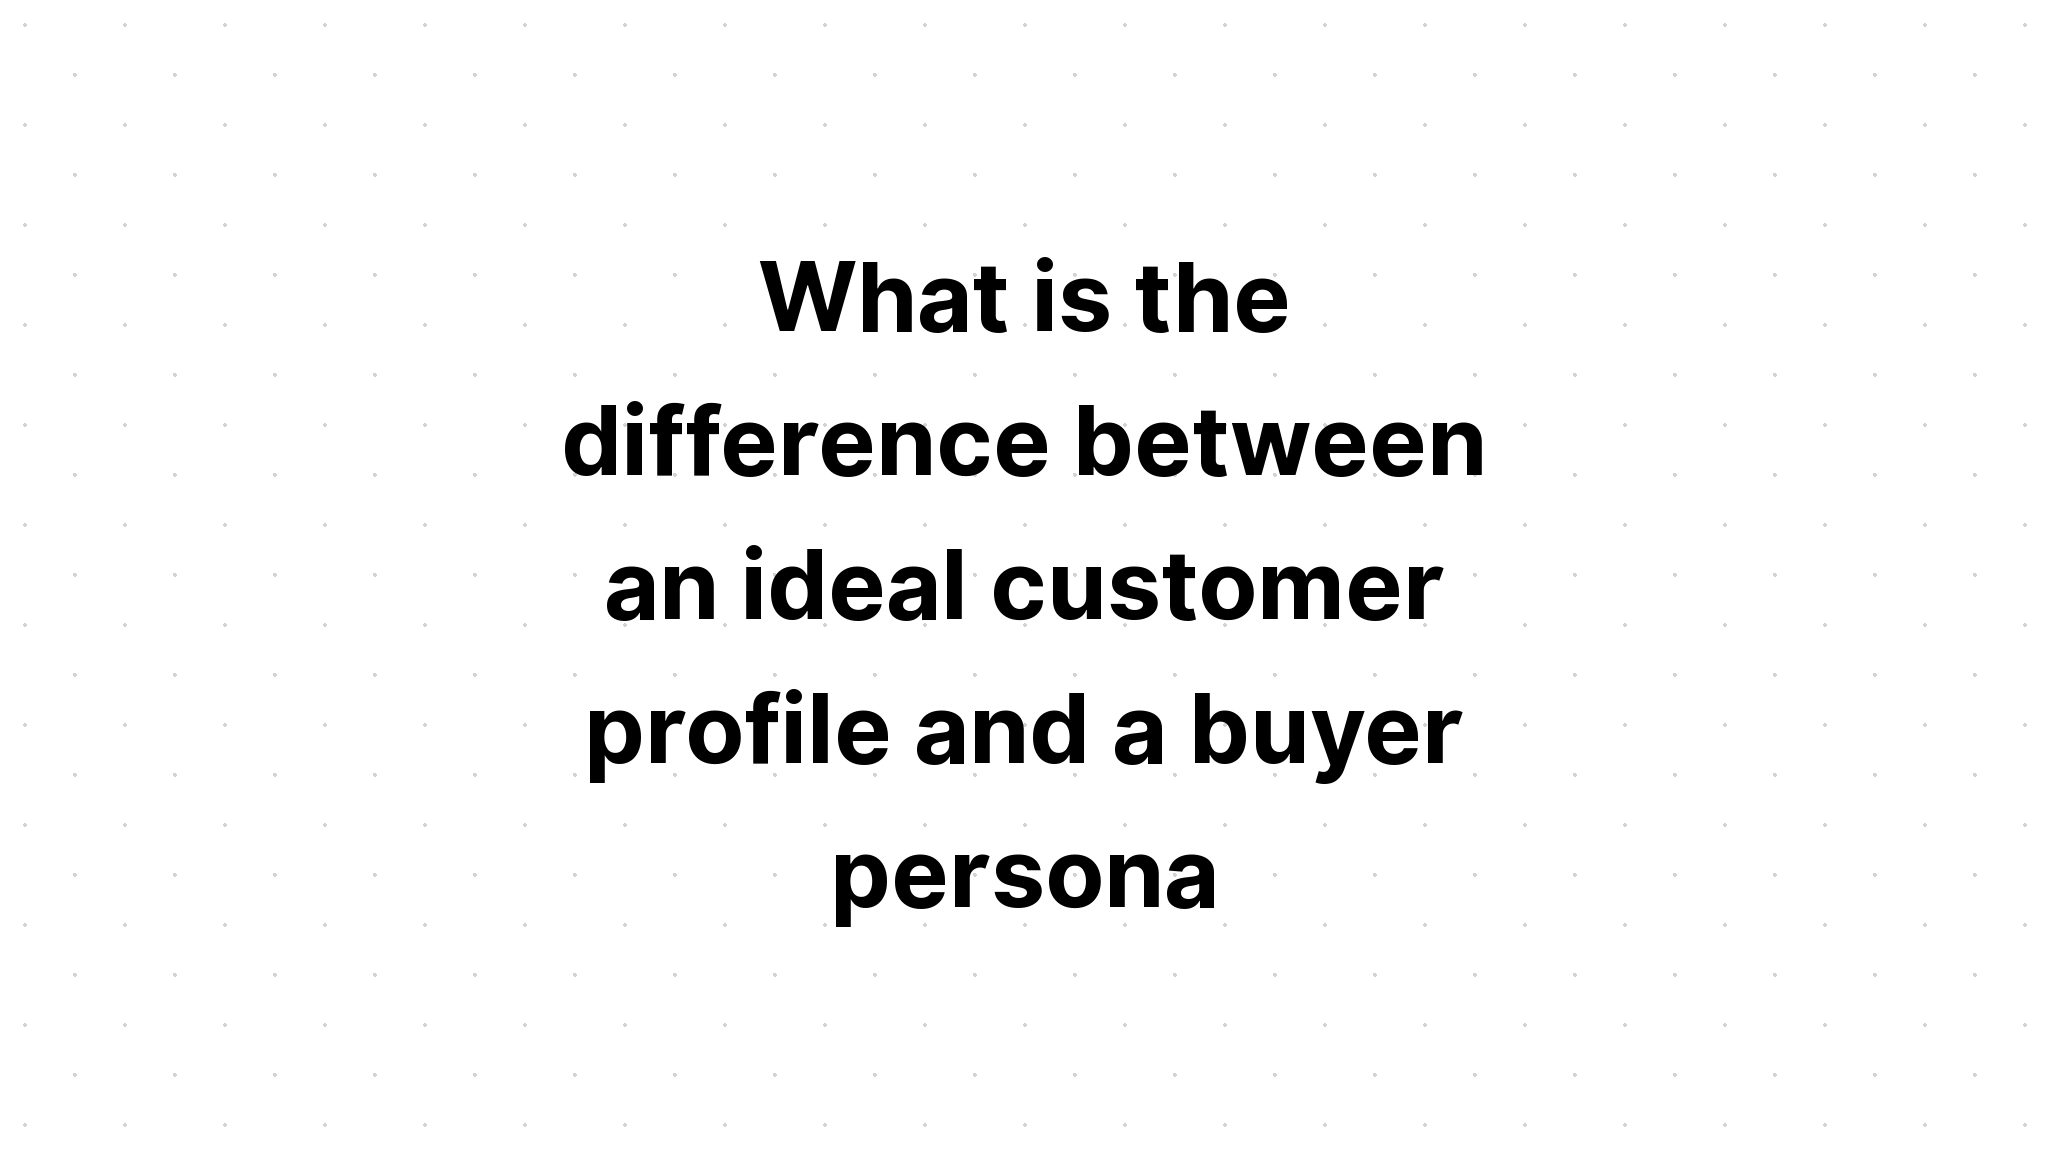 what-is-the-difference-between-an-ideal-customer-profile-and-a-buyer